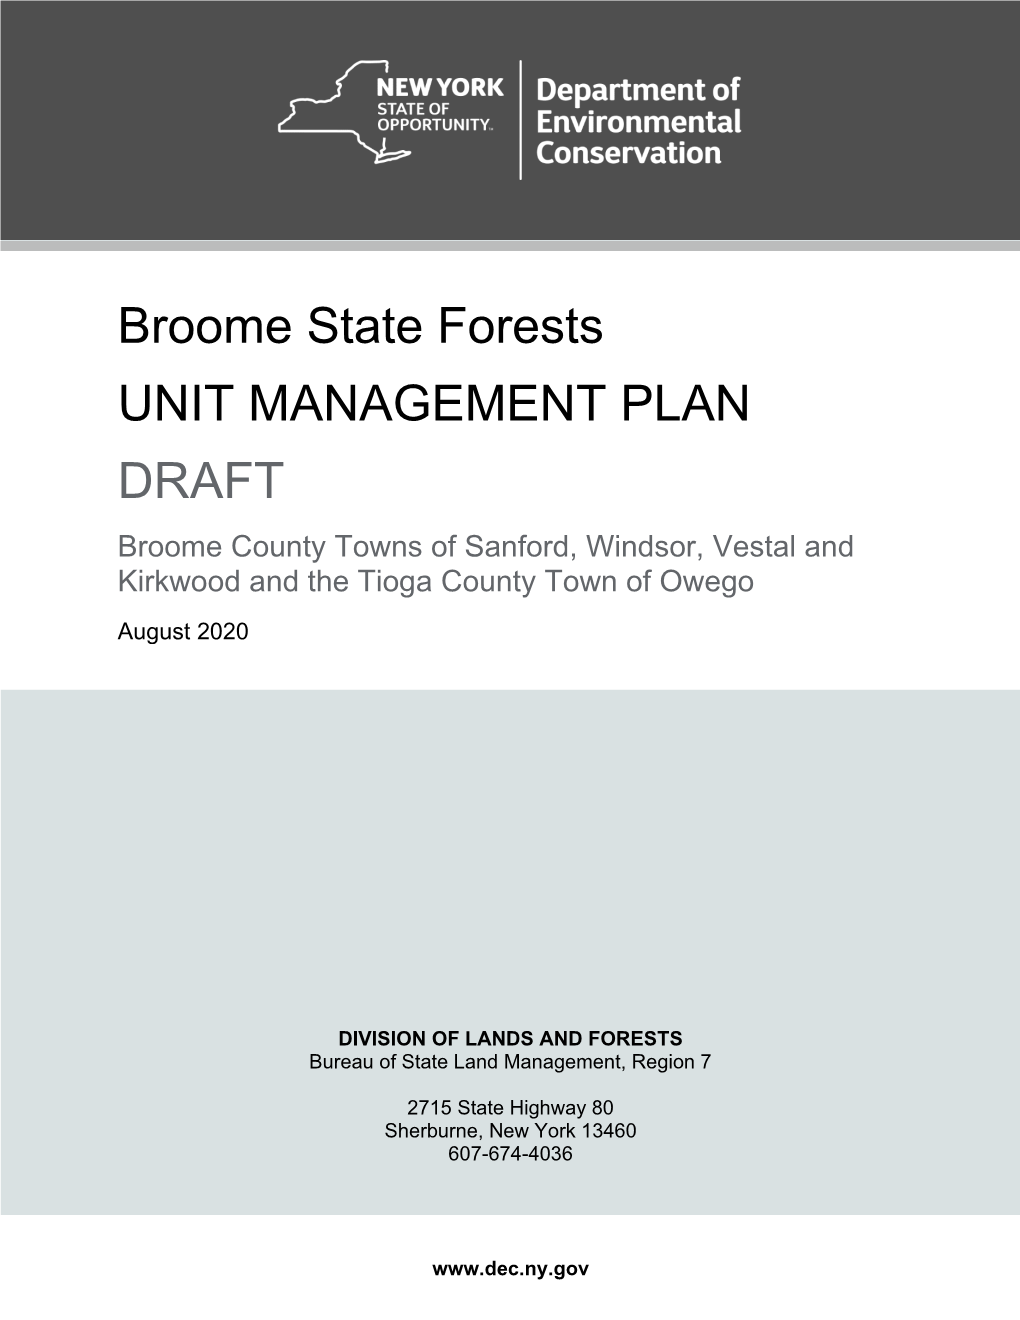 Draft Broome State Forests Unit Management Plan